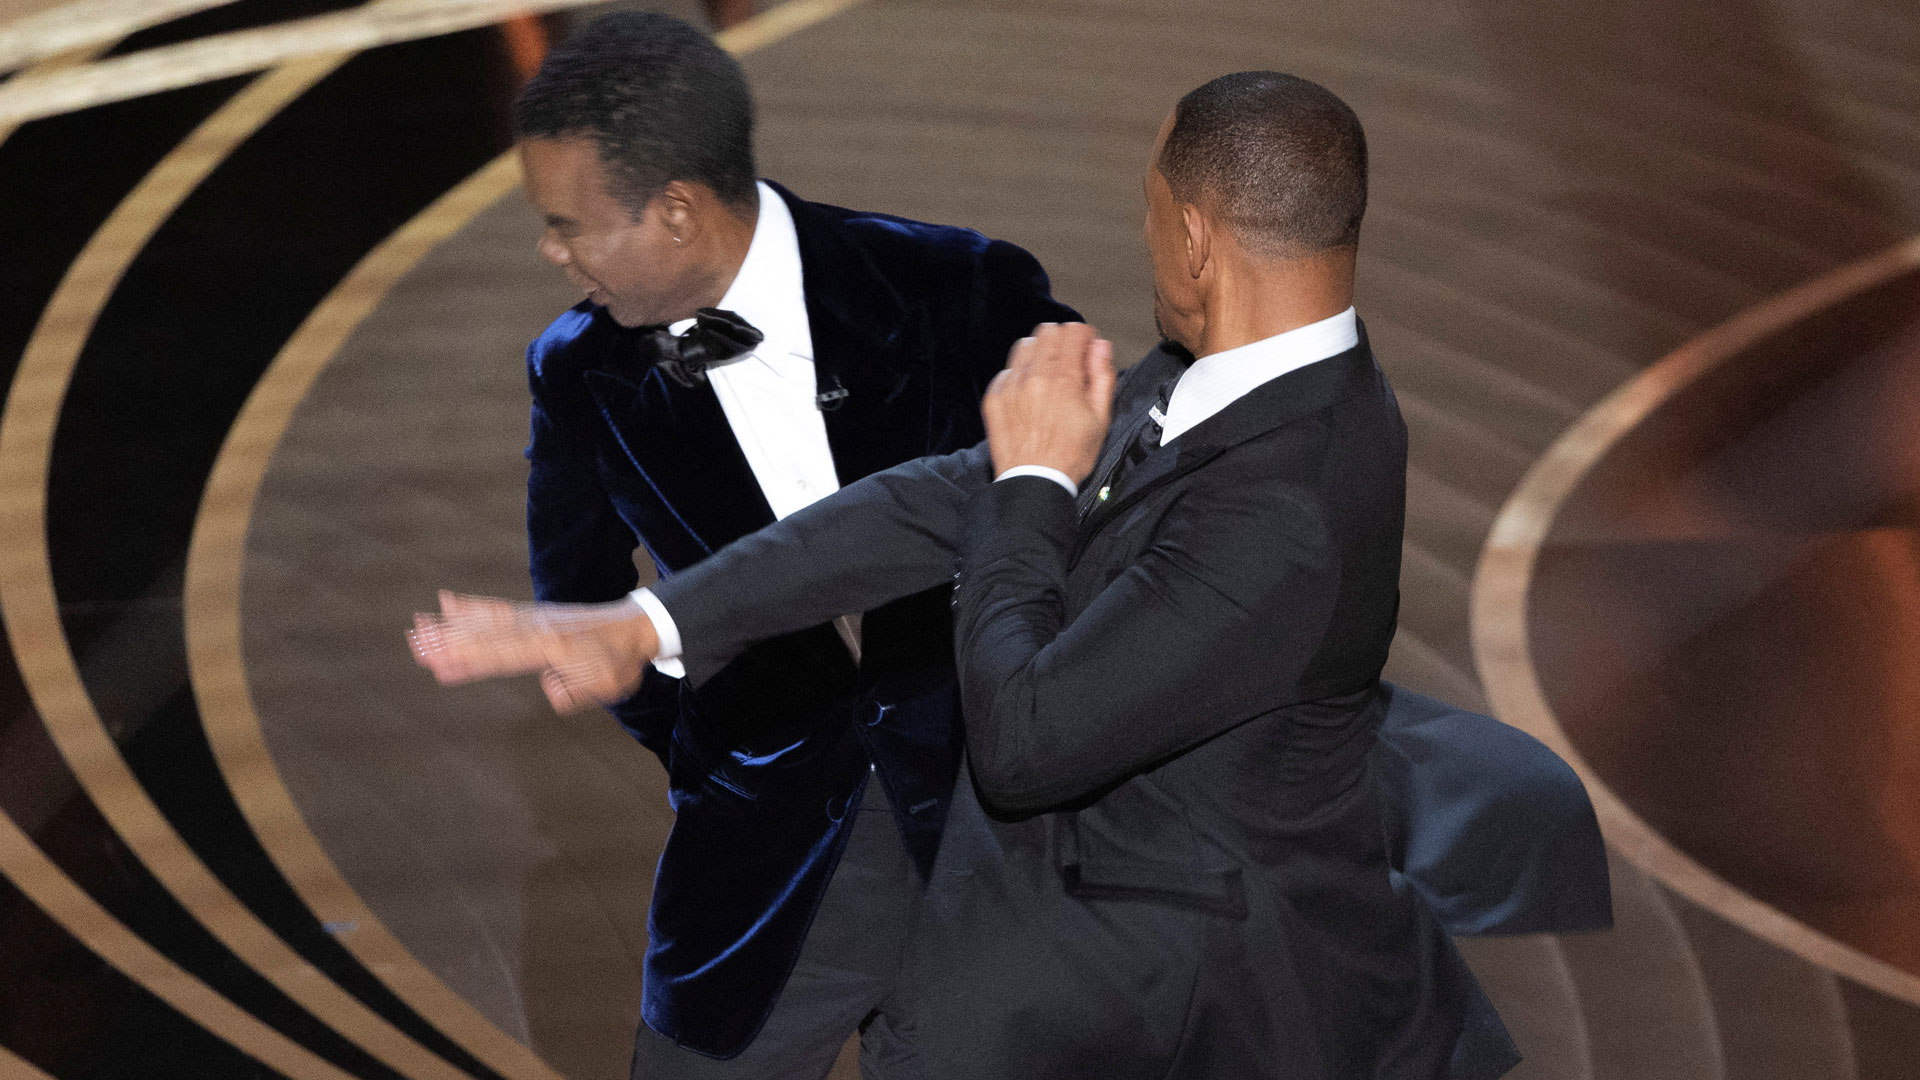 Five most scandalous Oscars moments including Will Smith’s slap and Jennifer Lawrence’s embarrassing fall down stairs [Video]